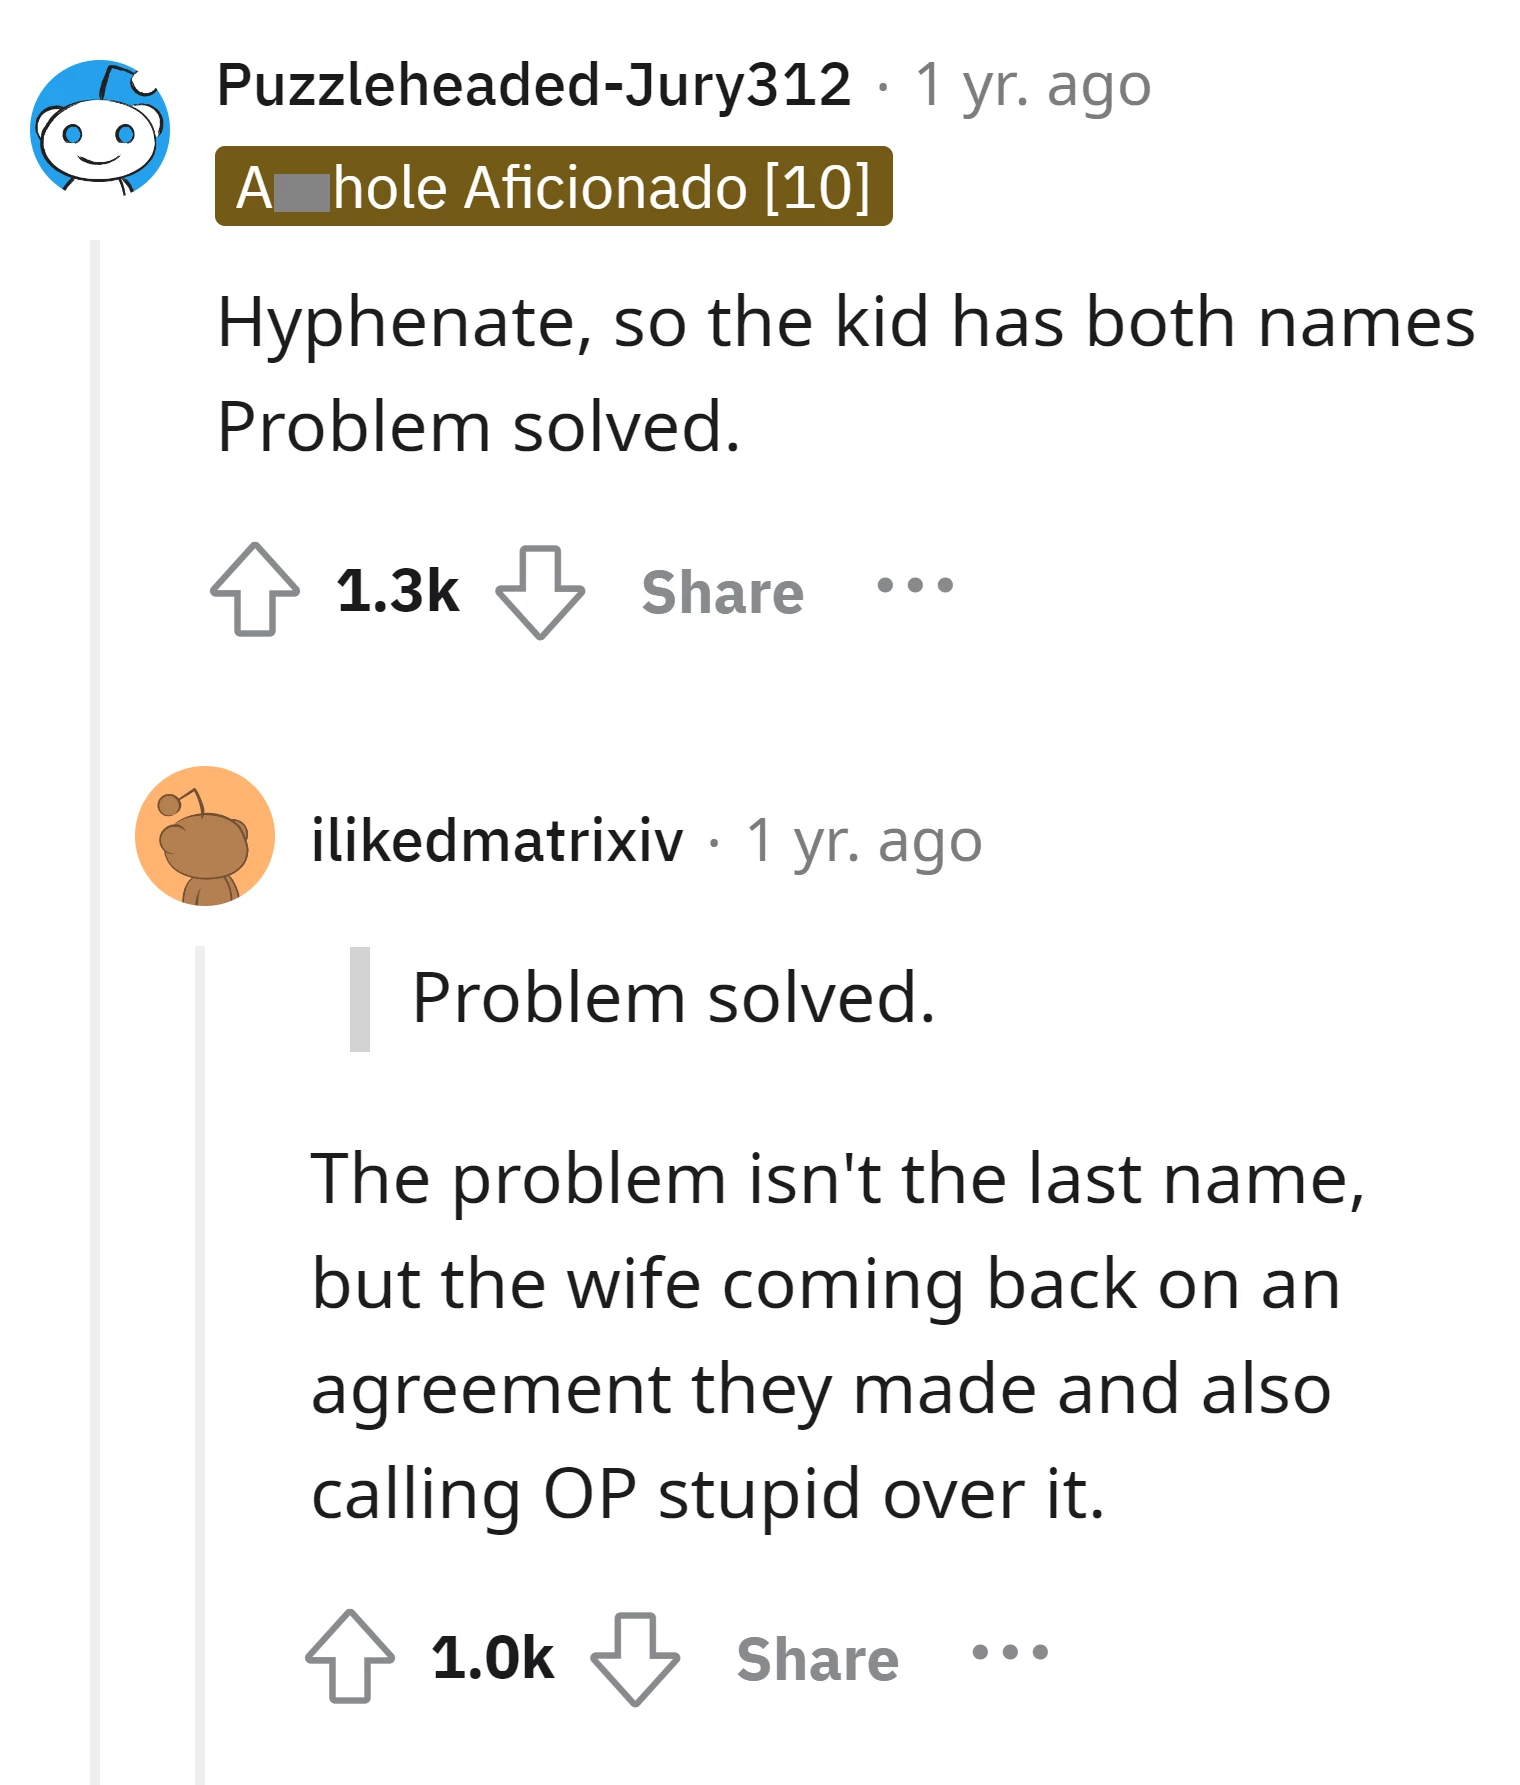 The wife is disrespectful for calling the OP stupid